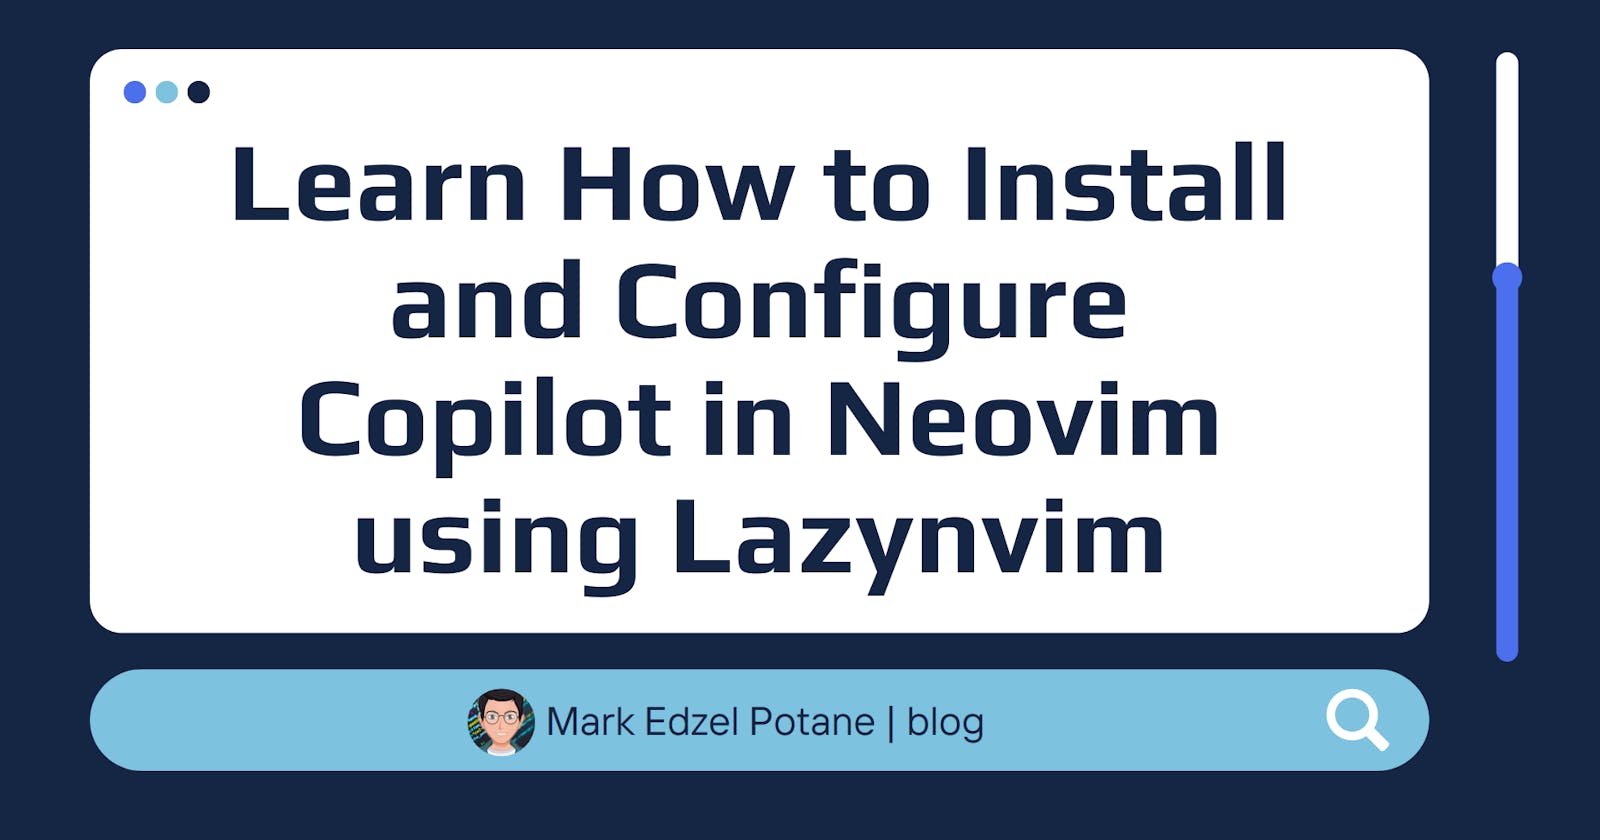 Neovim: Learn How to Install and Configure Copilot